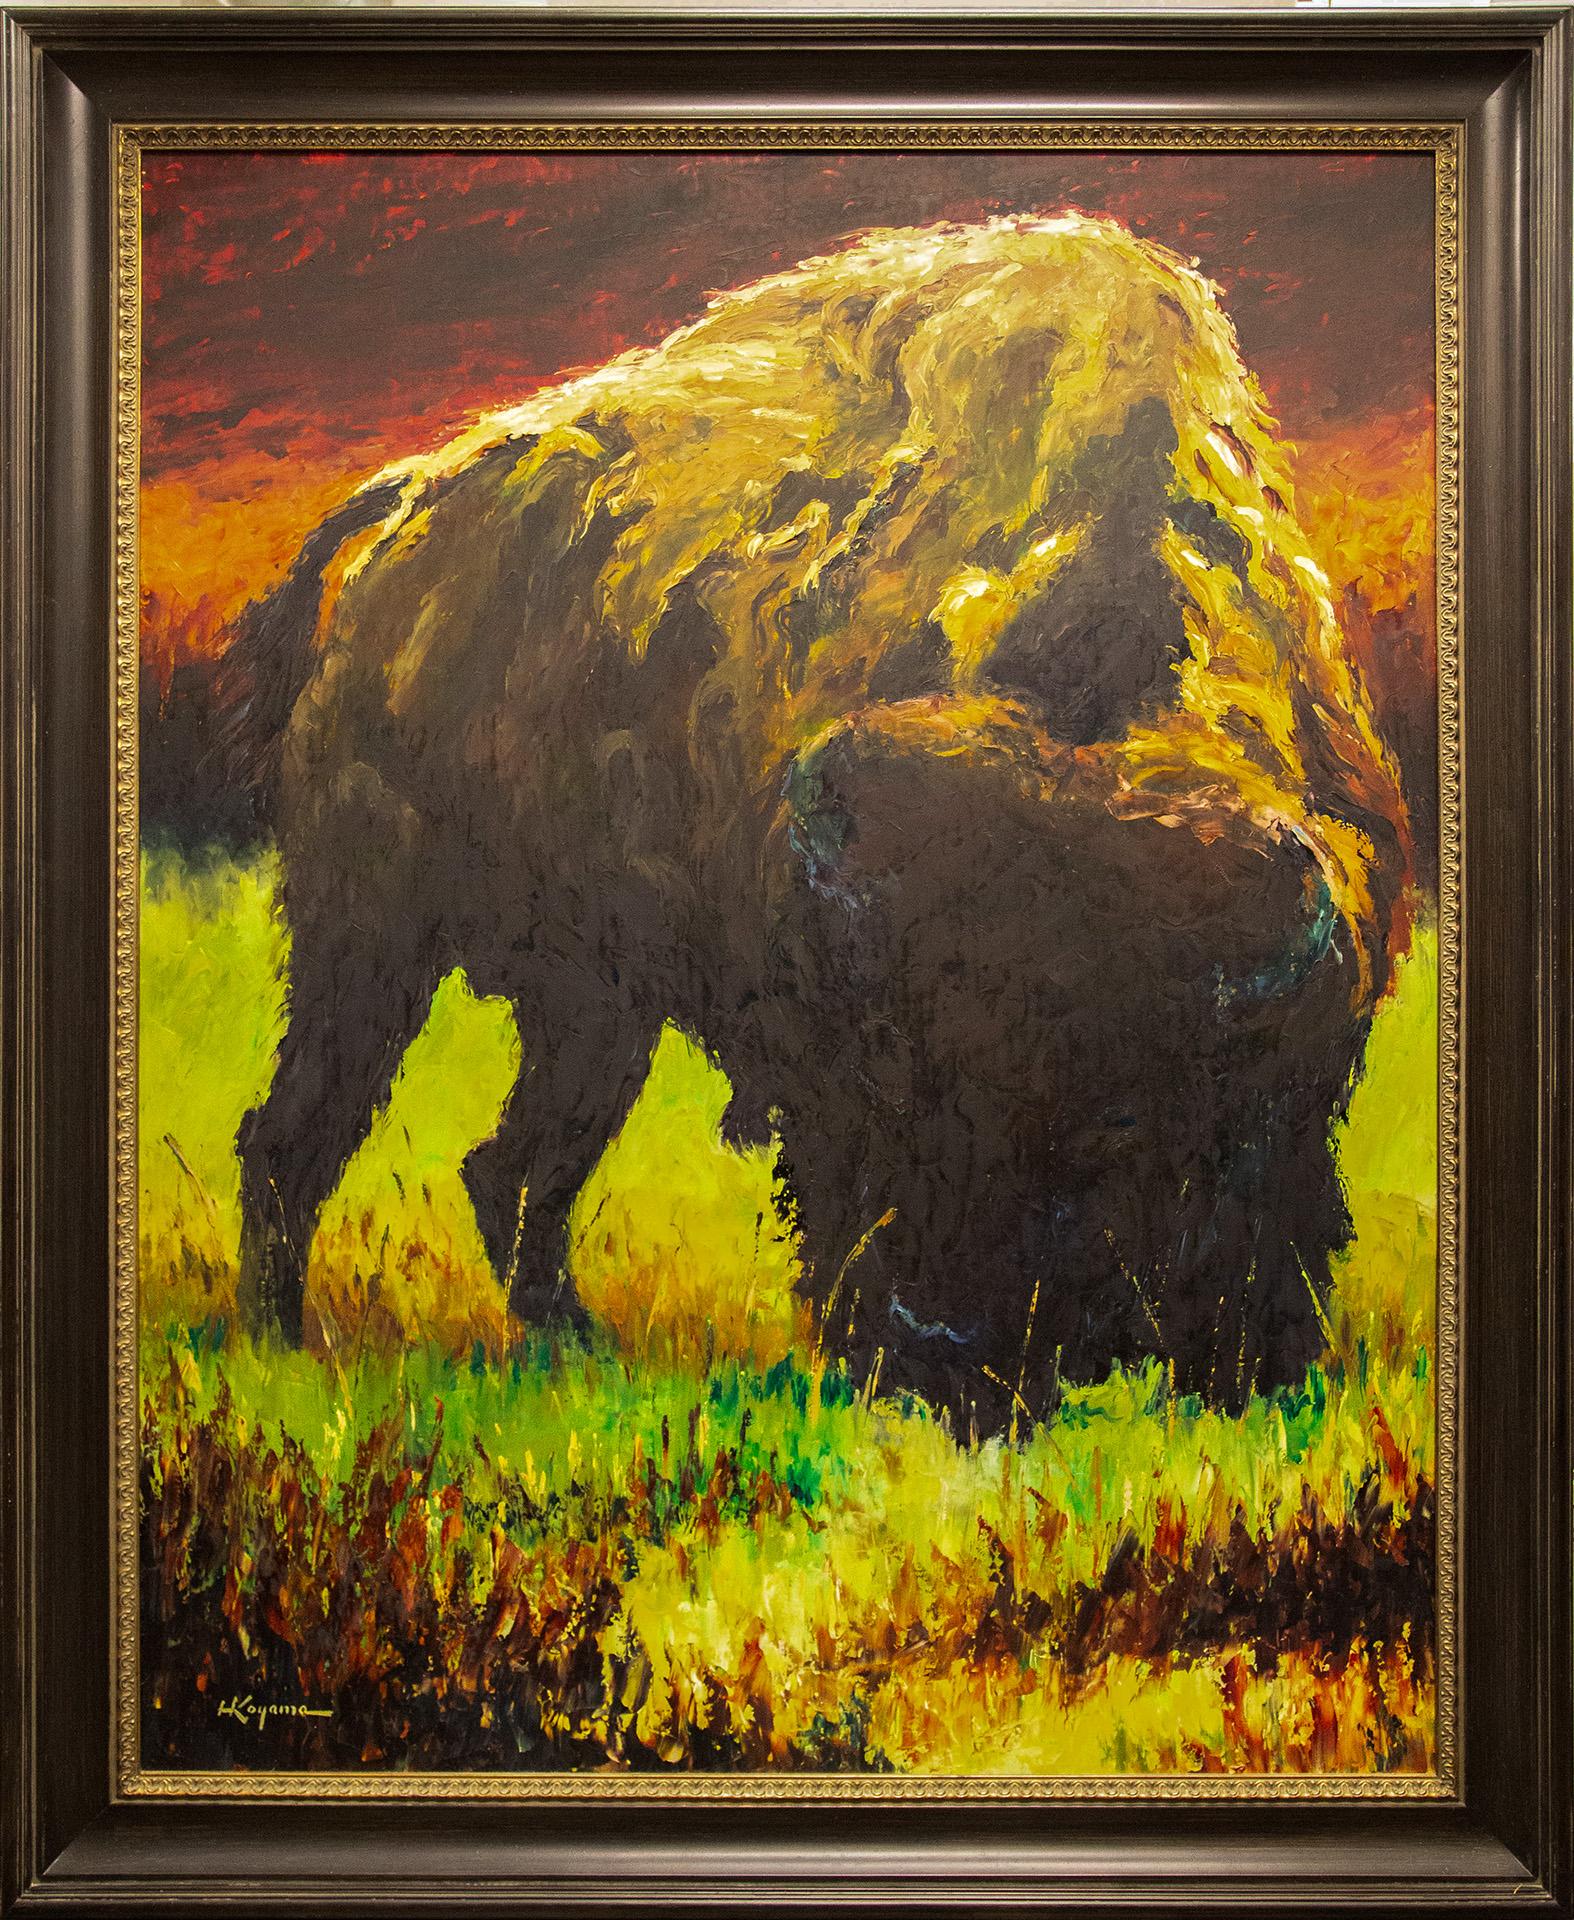 Late Day Bison, Wildlife Impressionist Oil Painting on Panel, Western Art